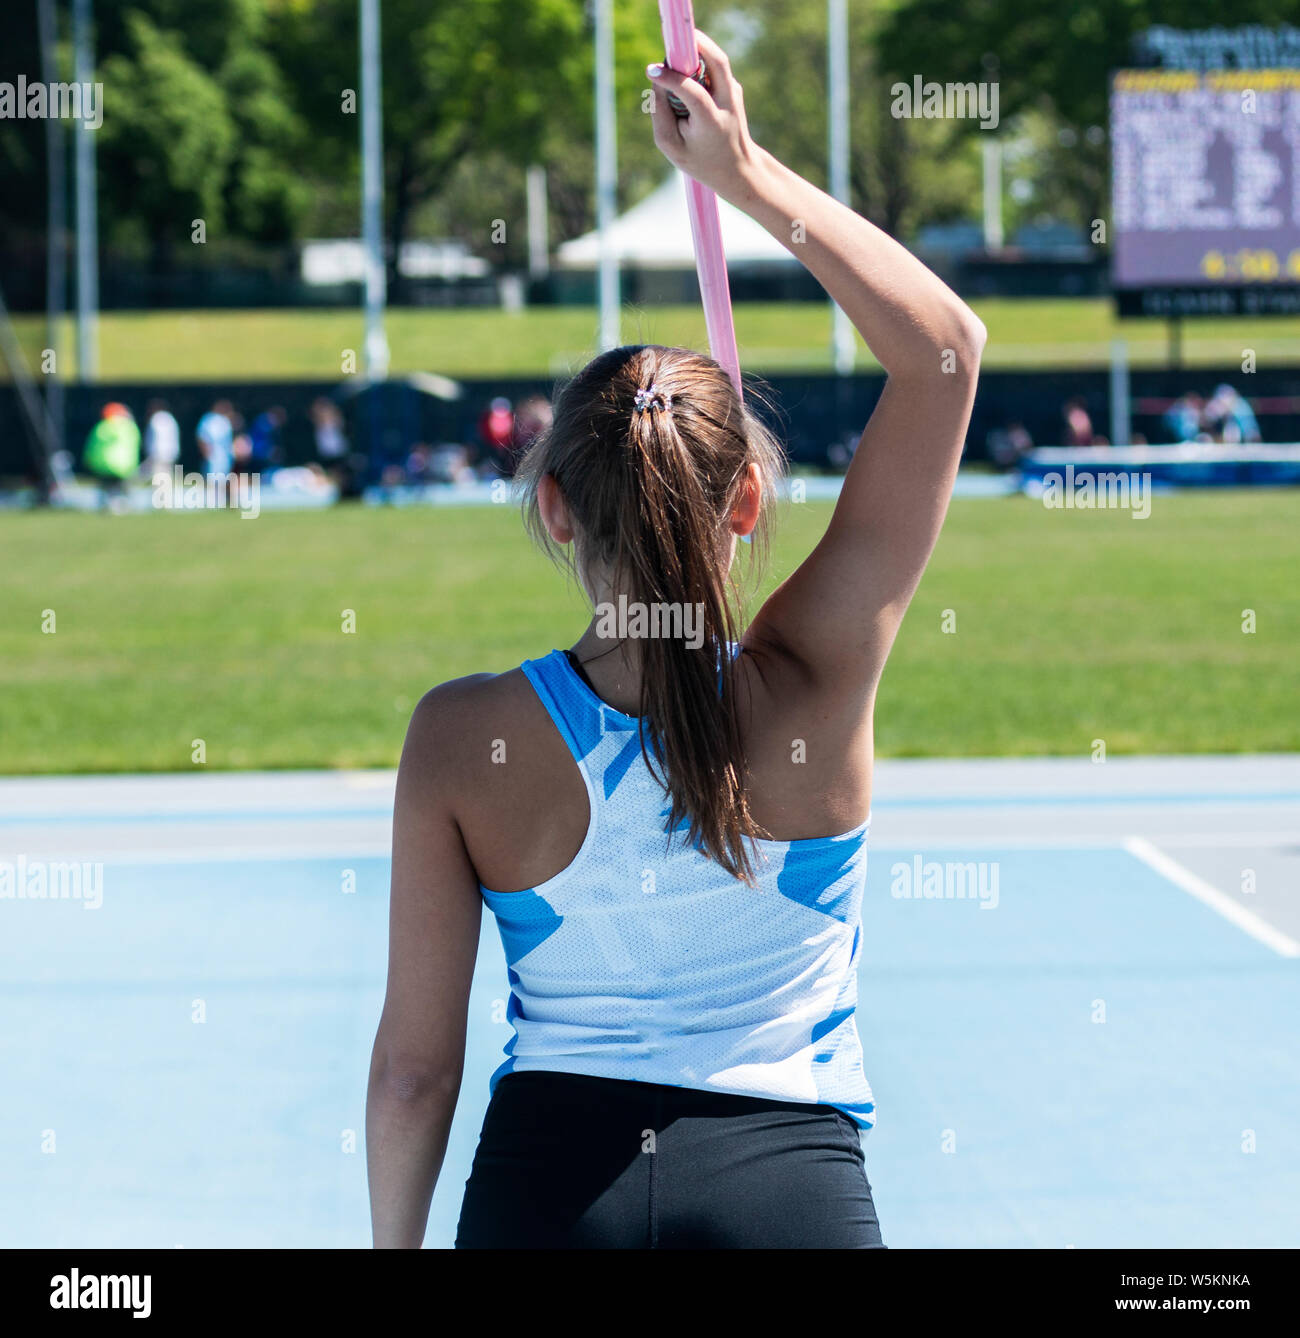 A high school girl holding a javelin overhead as she gets ready to compete in a track and field event. Stock Photo